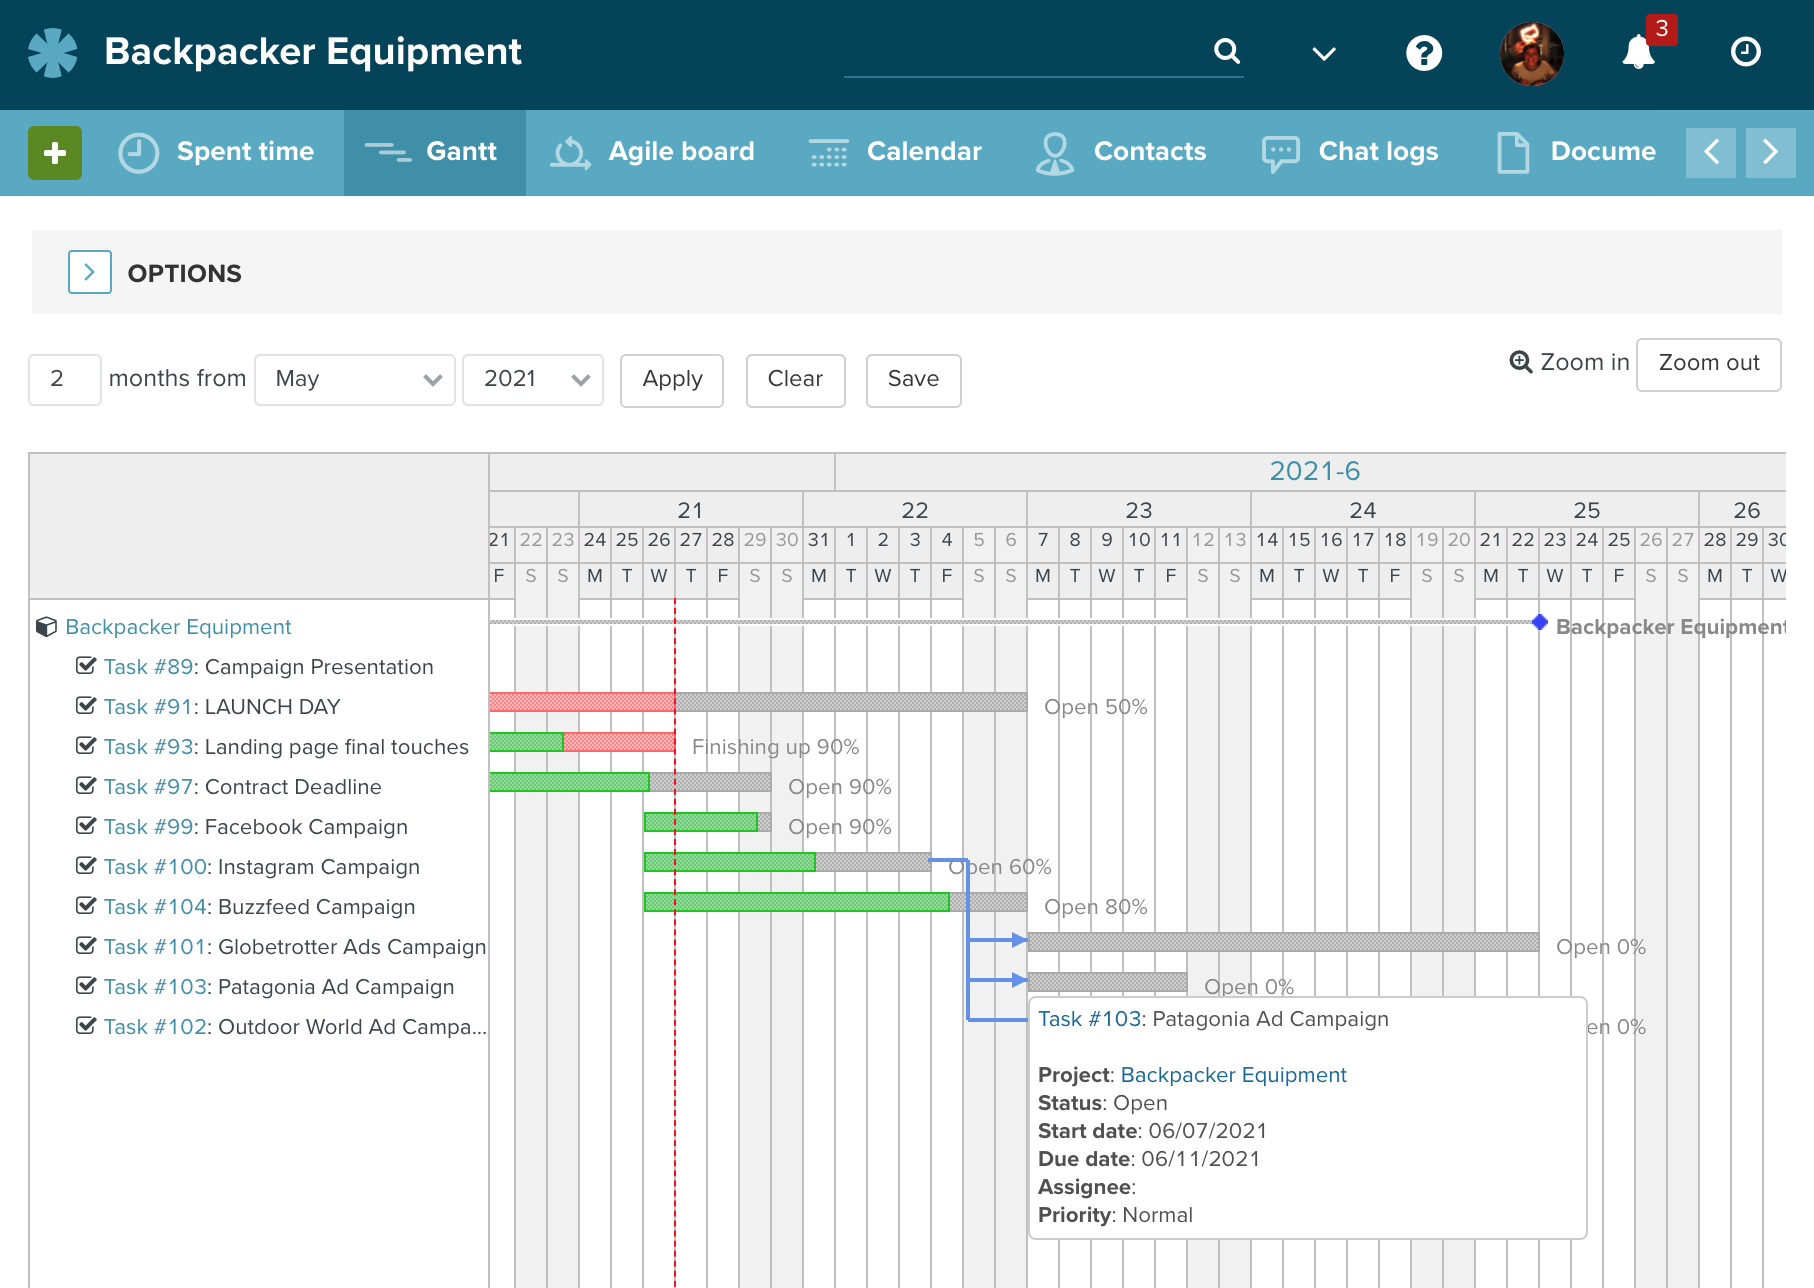 Gantt chart showing full visibility of the full project timeline